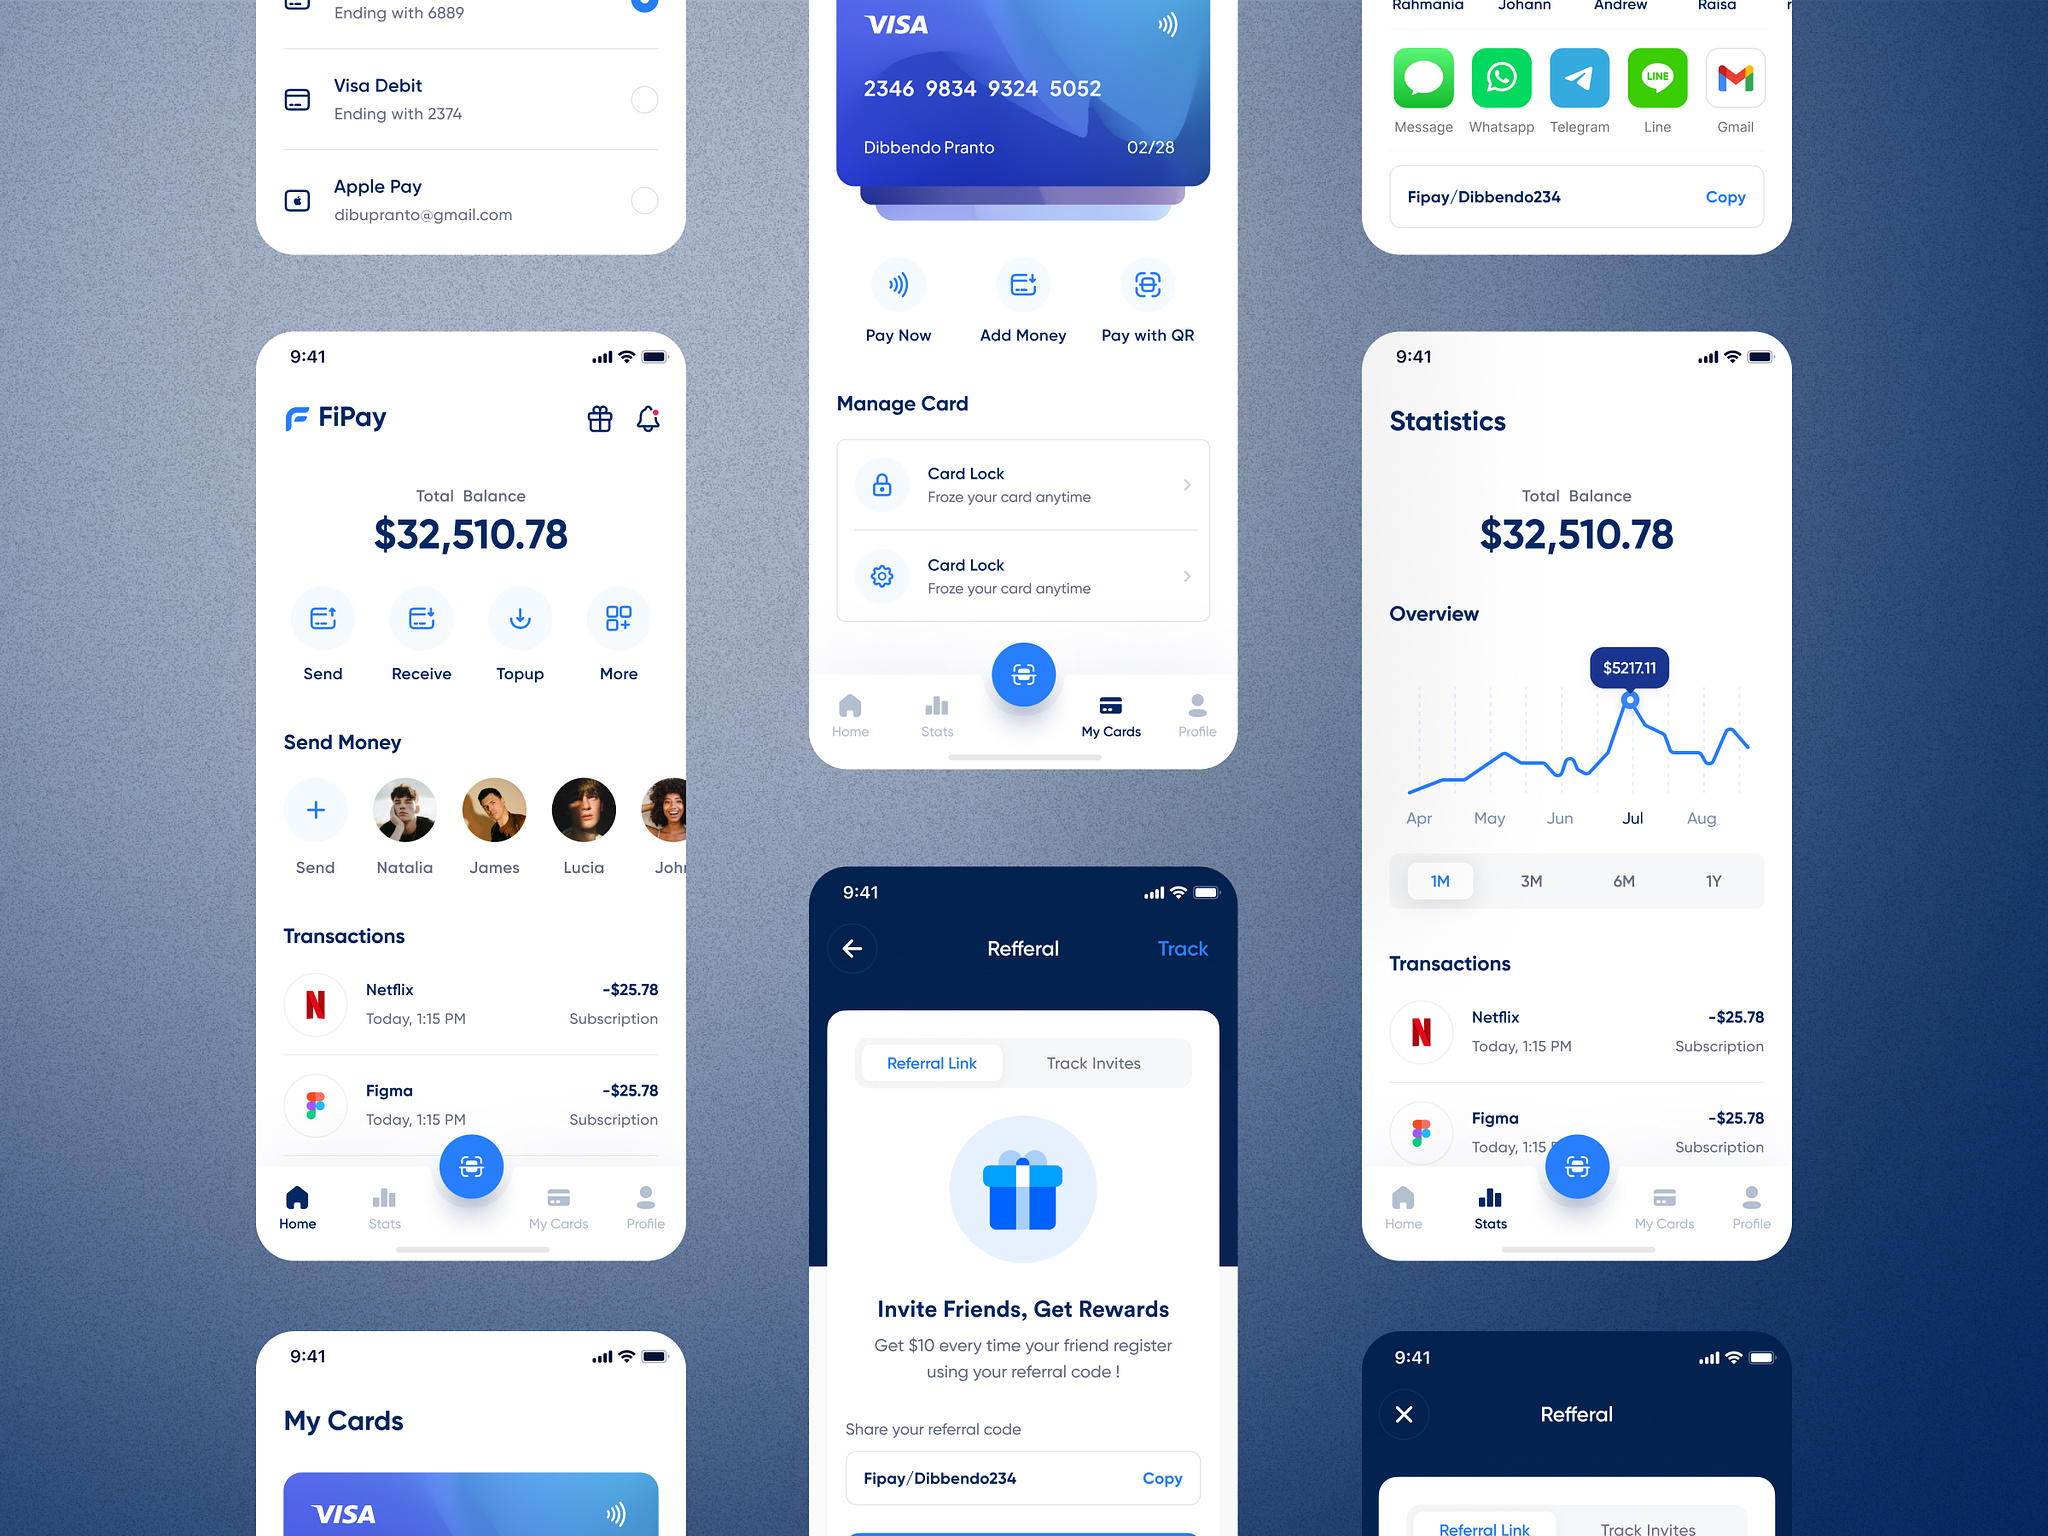  Fipay - Creating an MVP design for Fintech Mobile App from scratch